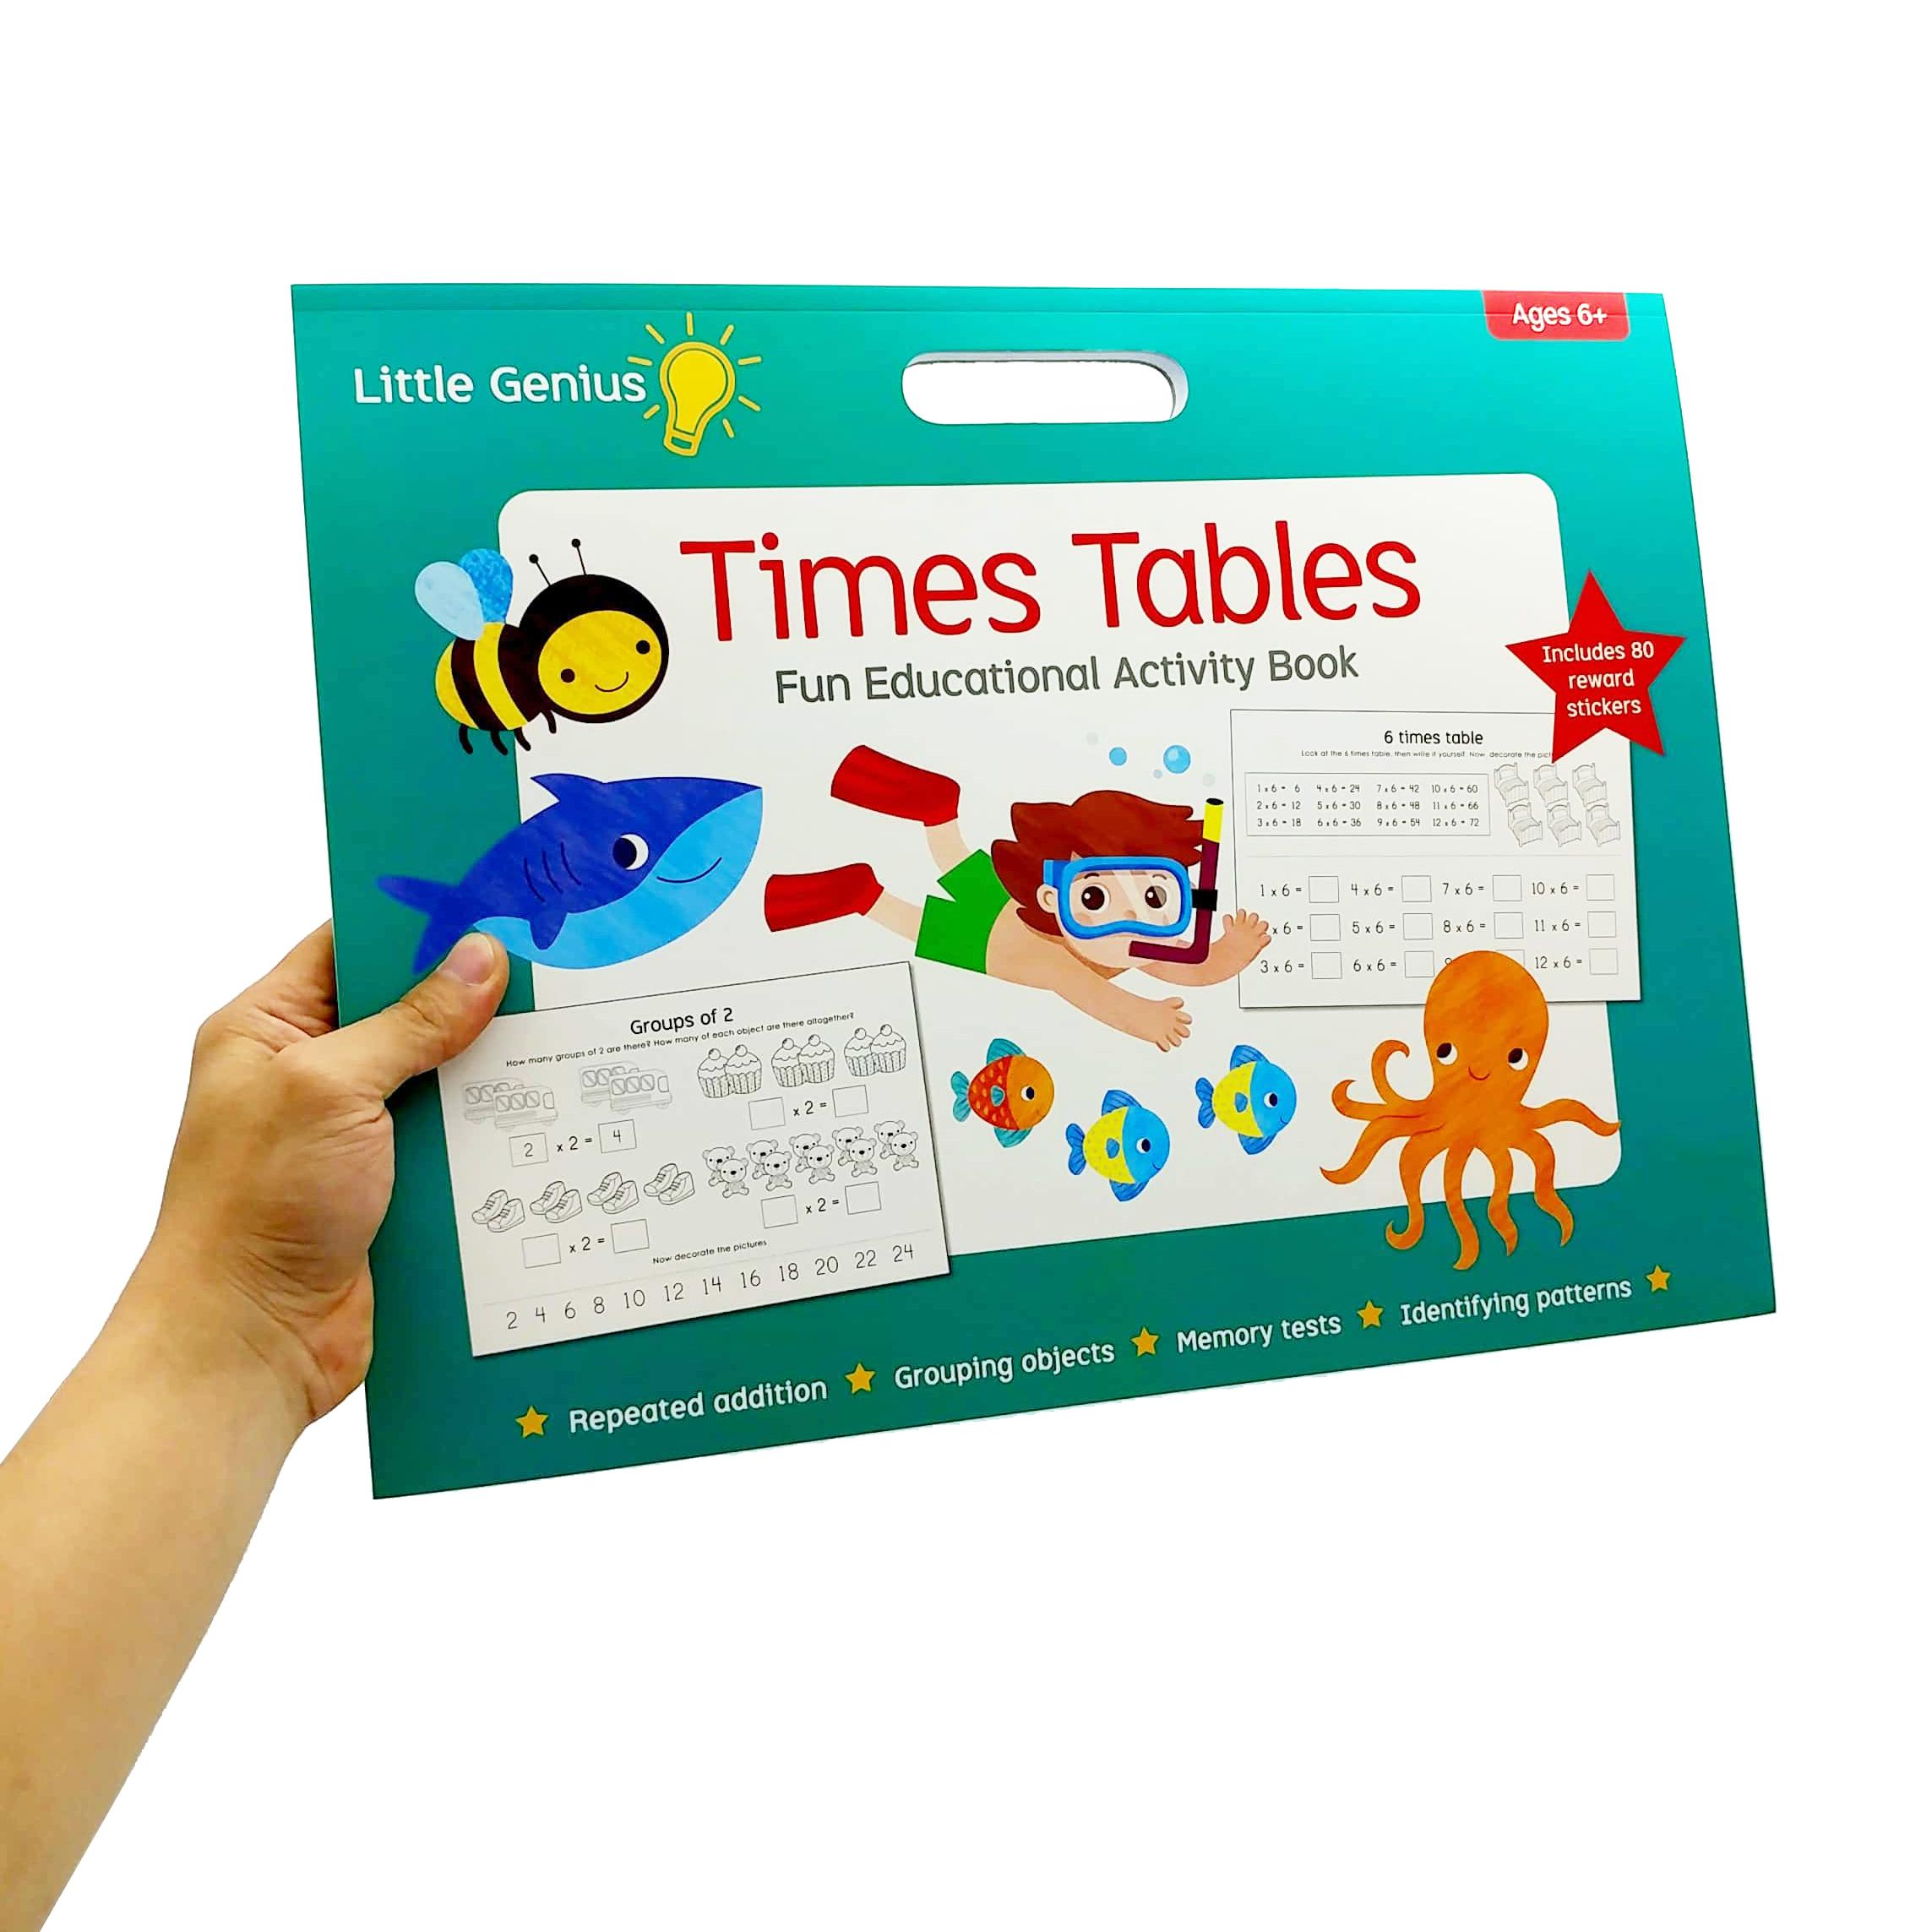 Little Genius: Times Table Fun Educational Activity Book